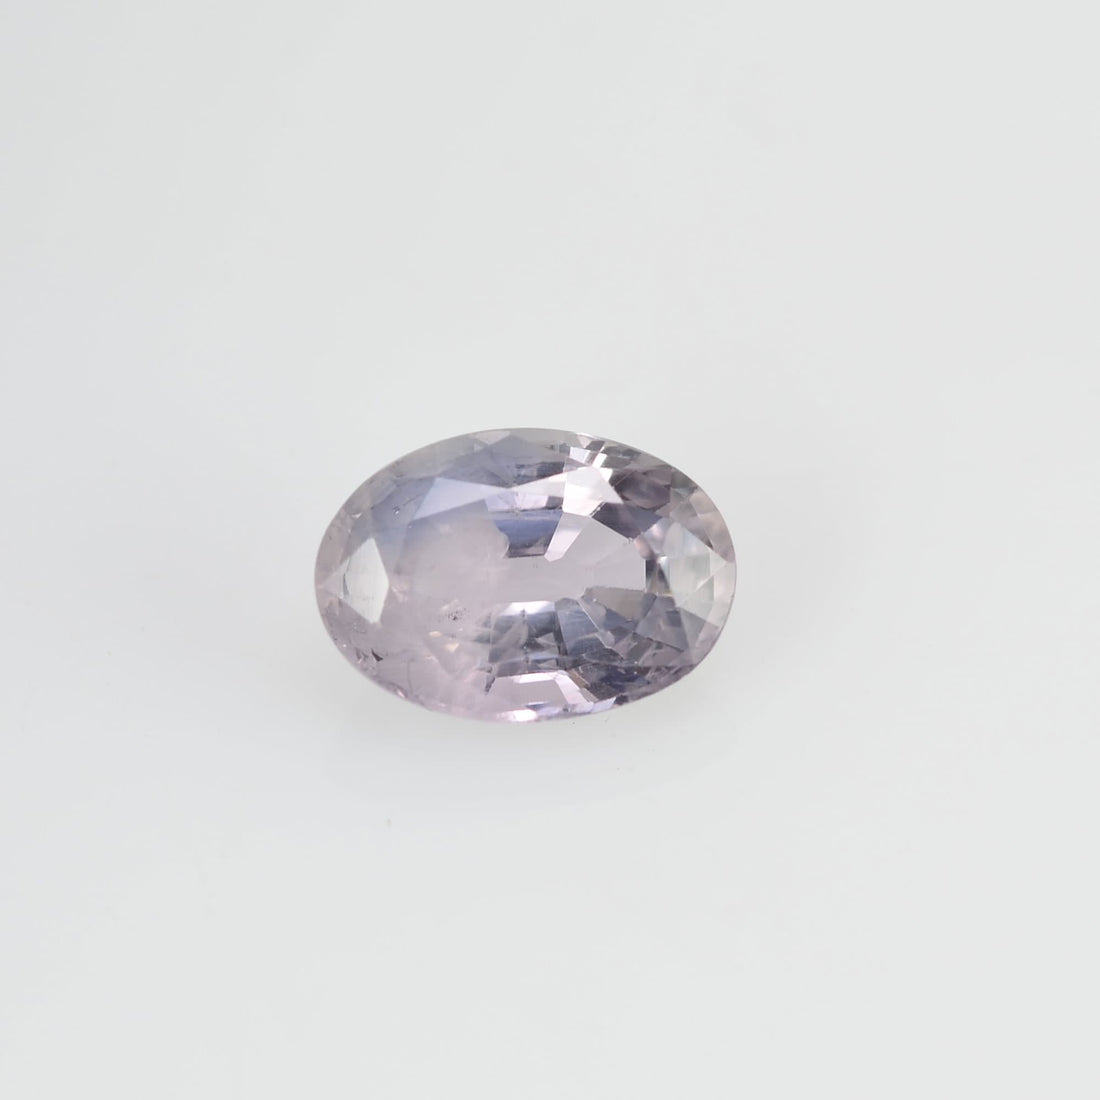 1.08 cts Natural Fancy Sapphire Loose Gemstone oval Cut